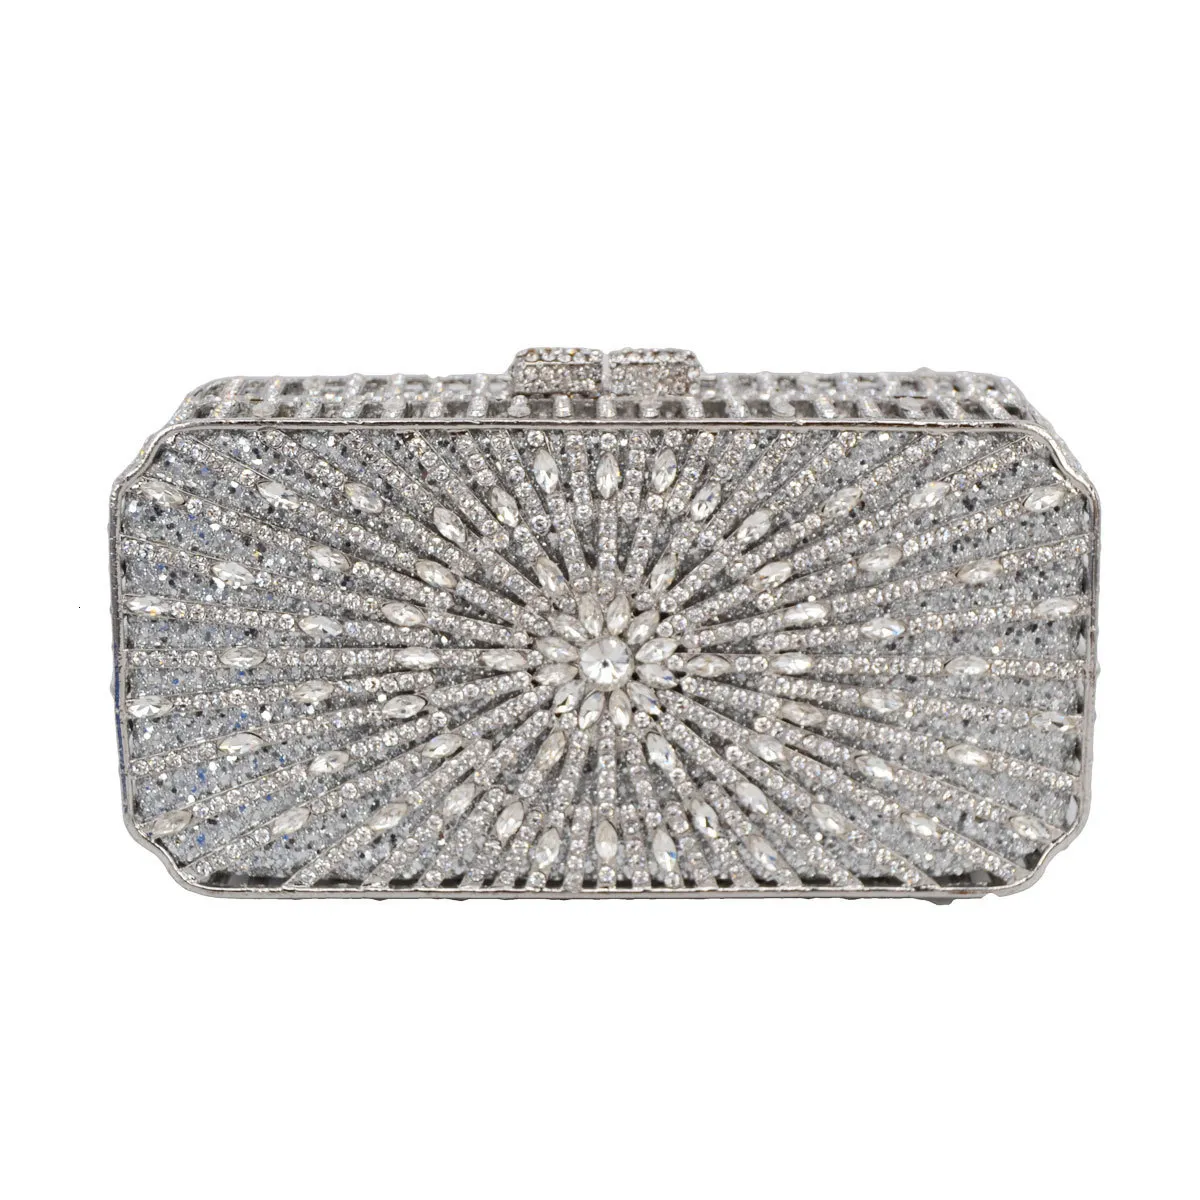 Evening Bags Gold Luxury Discount Designer Purses for Brides Sunray Patterns Metallic Silver Clutch Bag Small Crystal 88255 230728